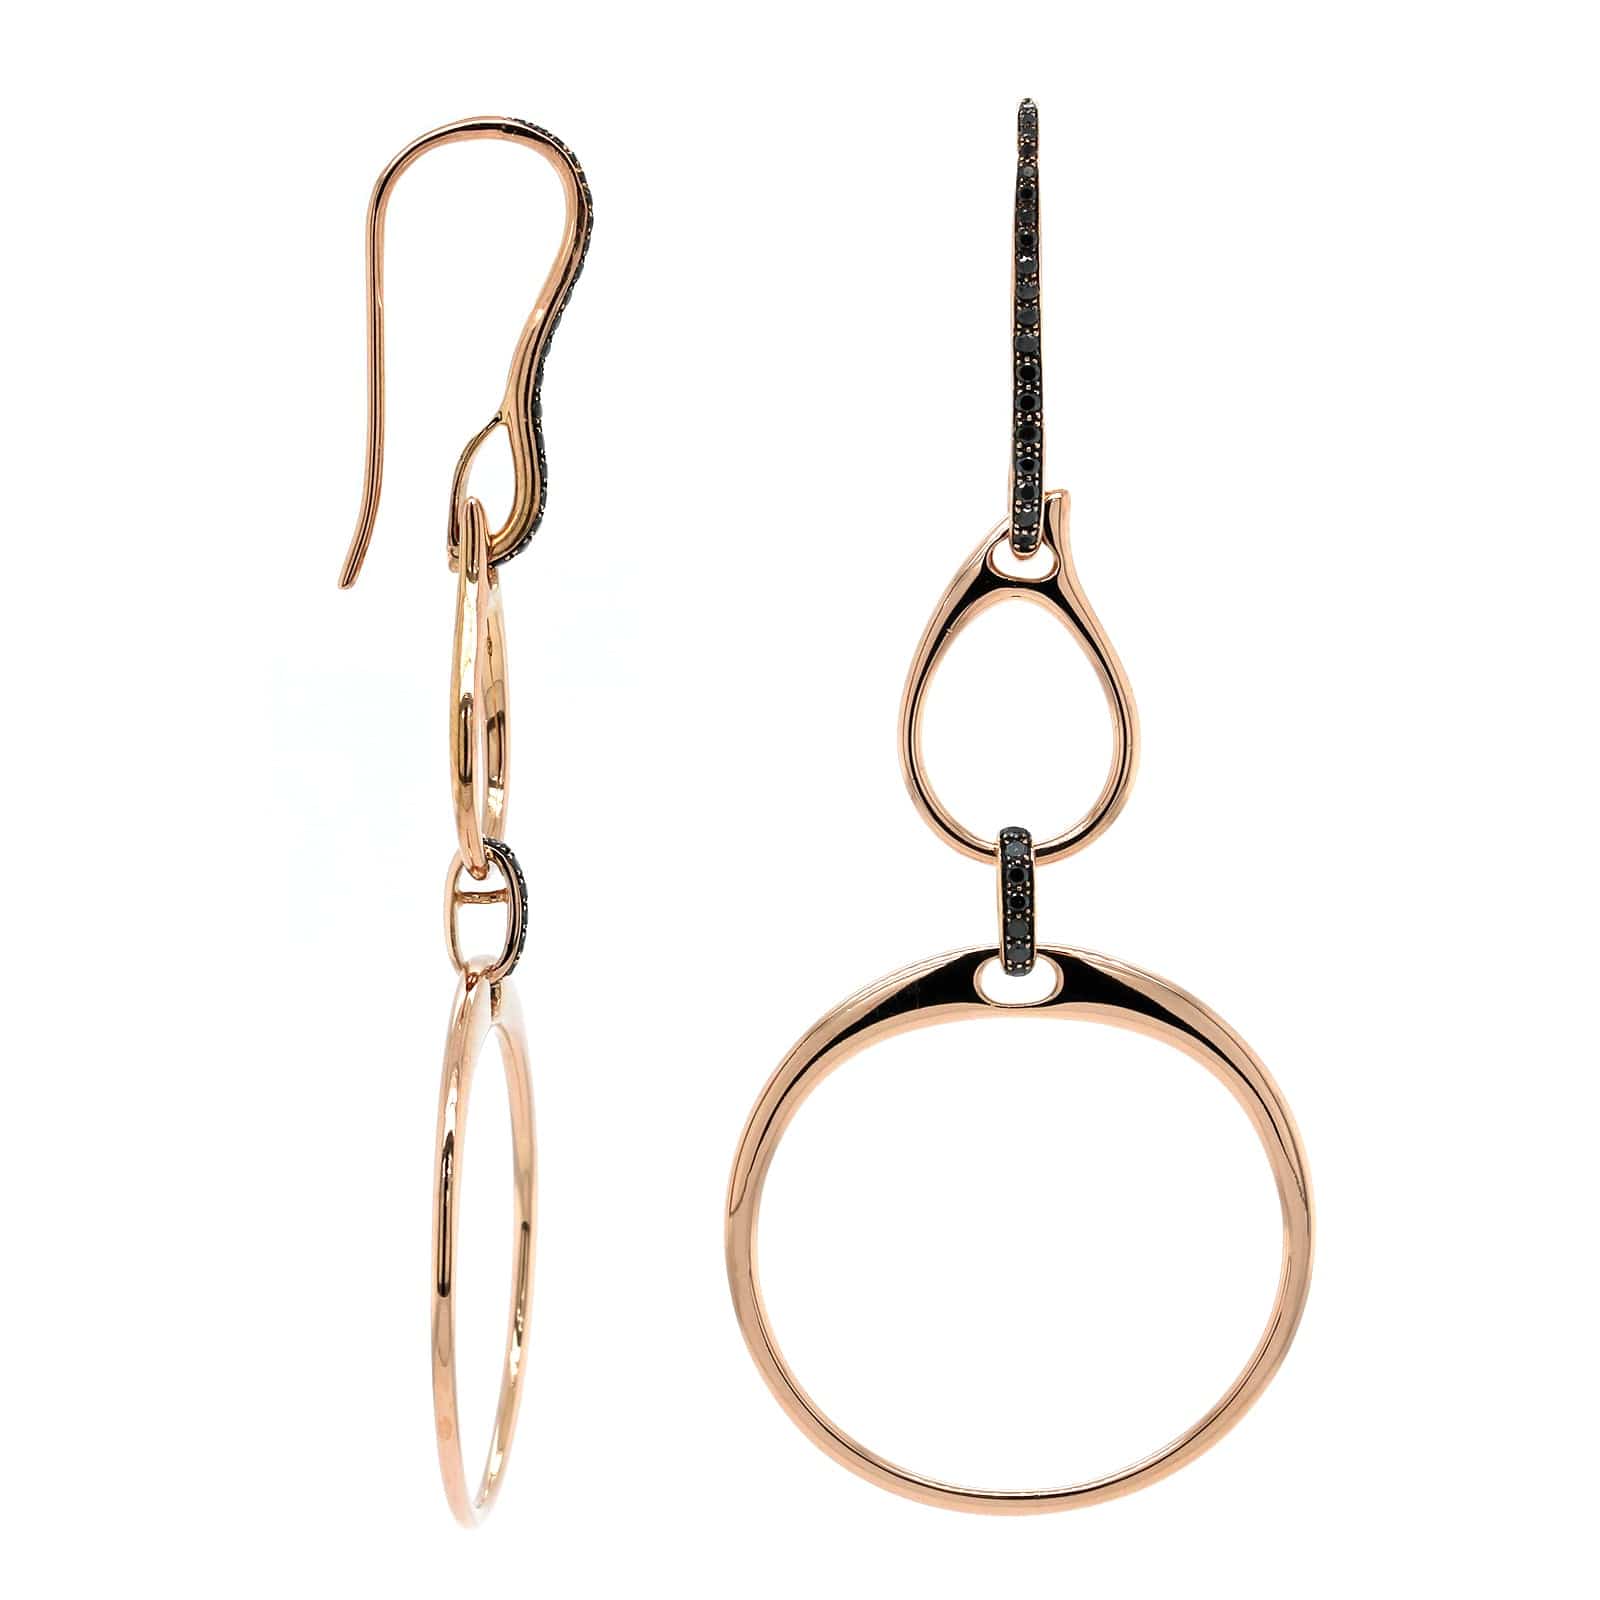 Tiffany T Mother-of-Pearl Circle Earrings in 18K Rose Gold